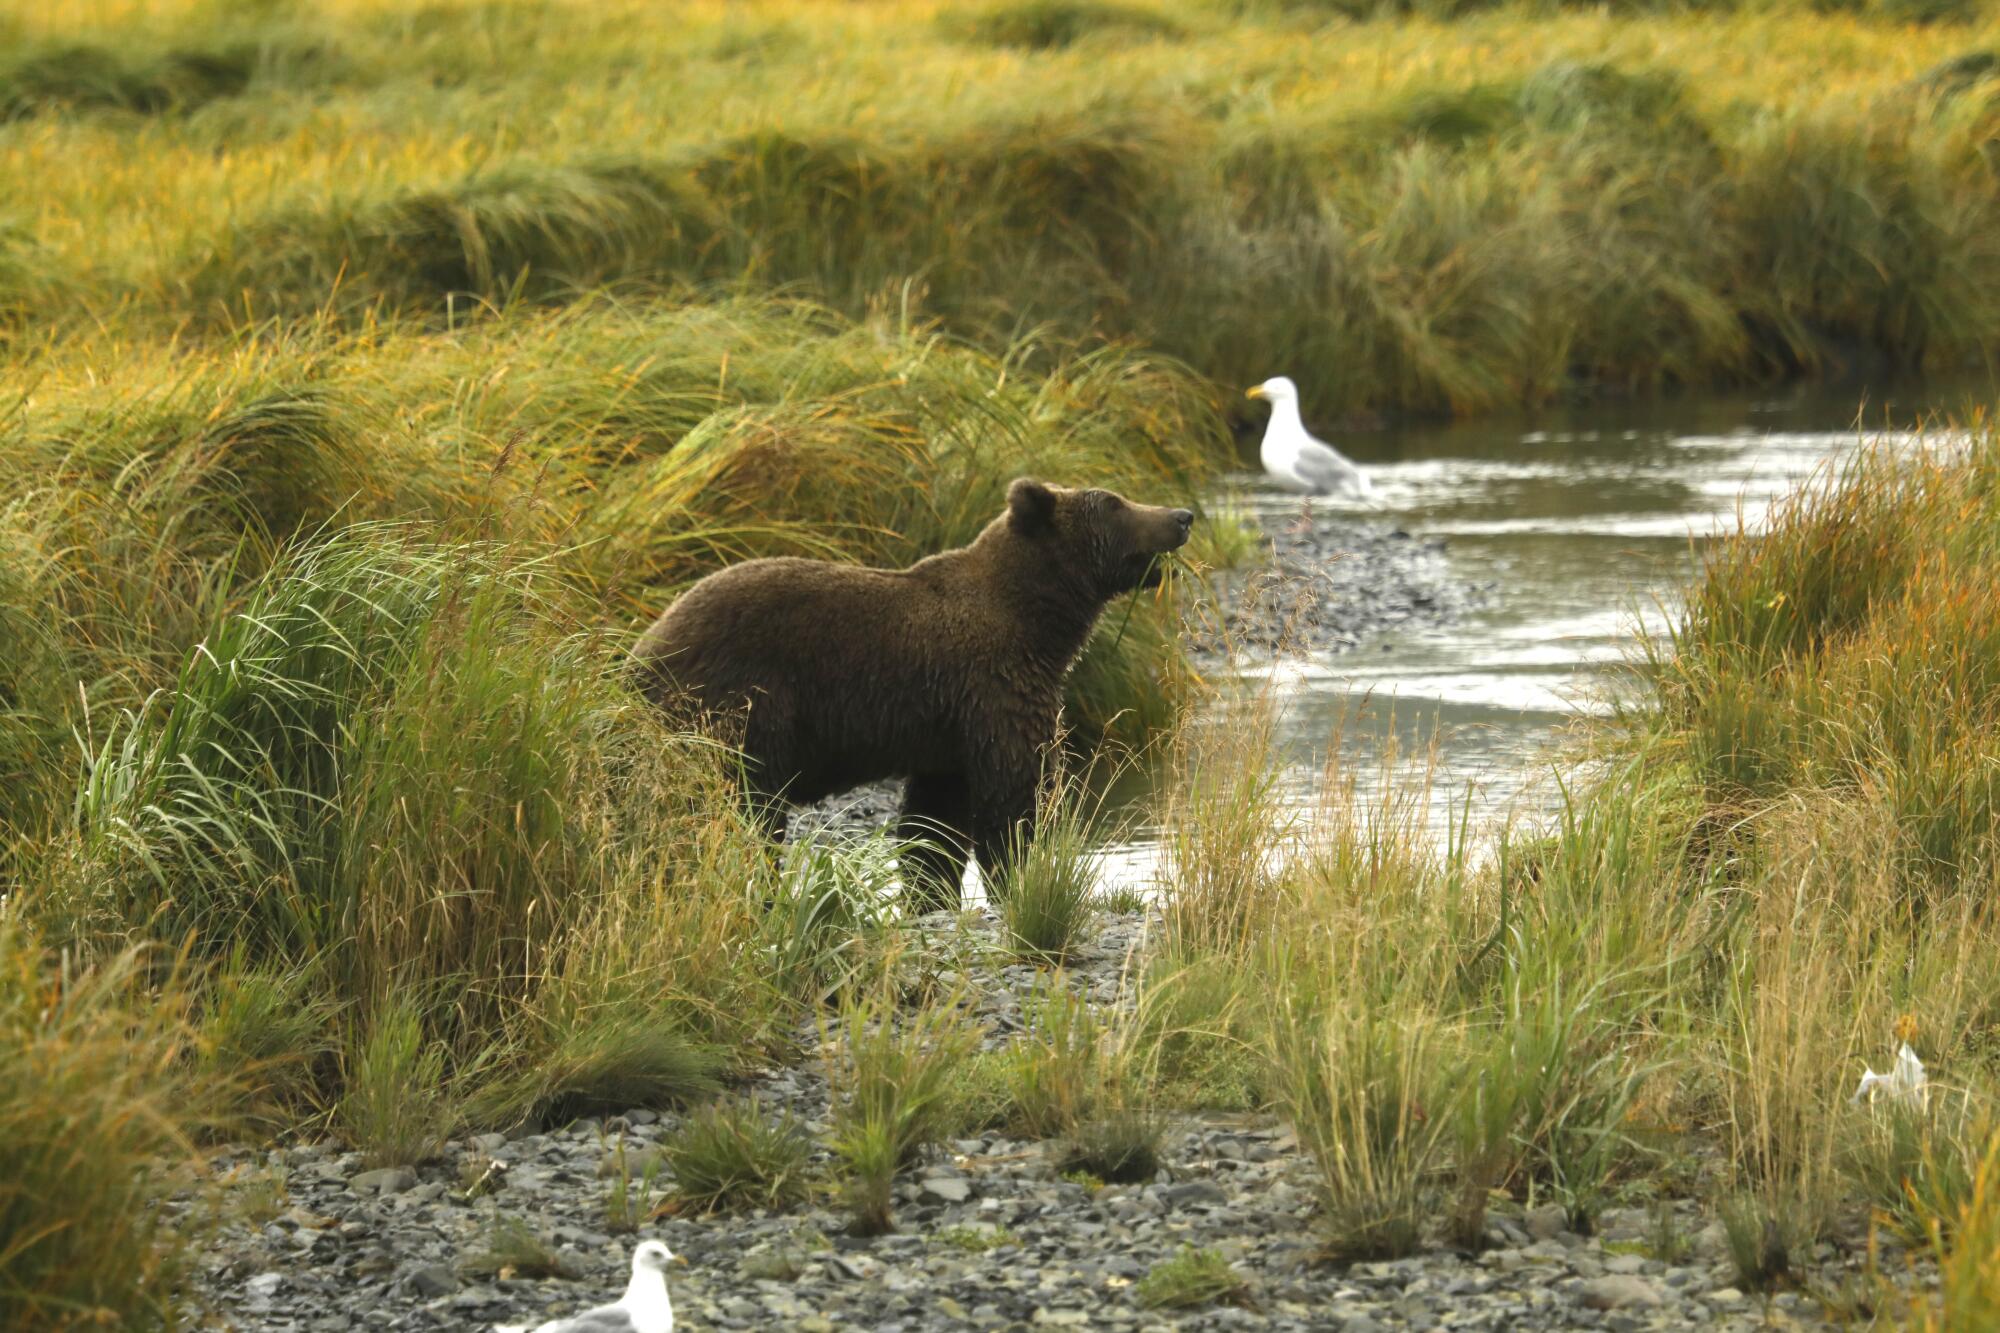 A Kodiak bear and seabirds in tall grass by the water